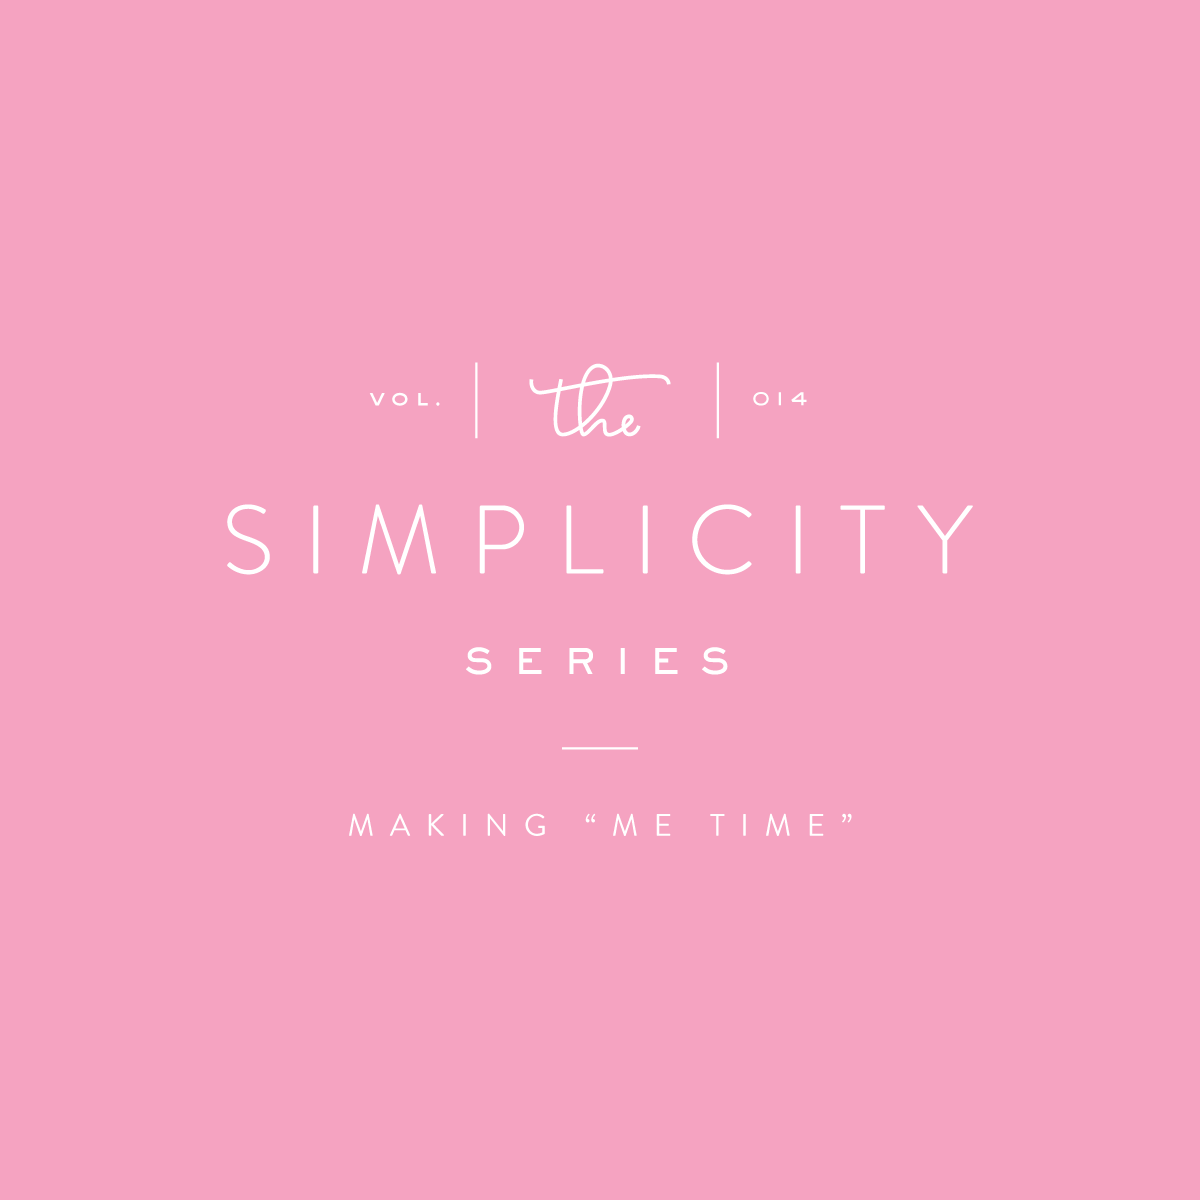 Simplified Schedule: Making “Me Time”